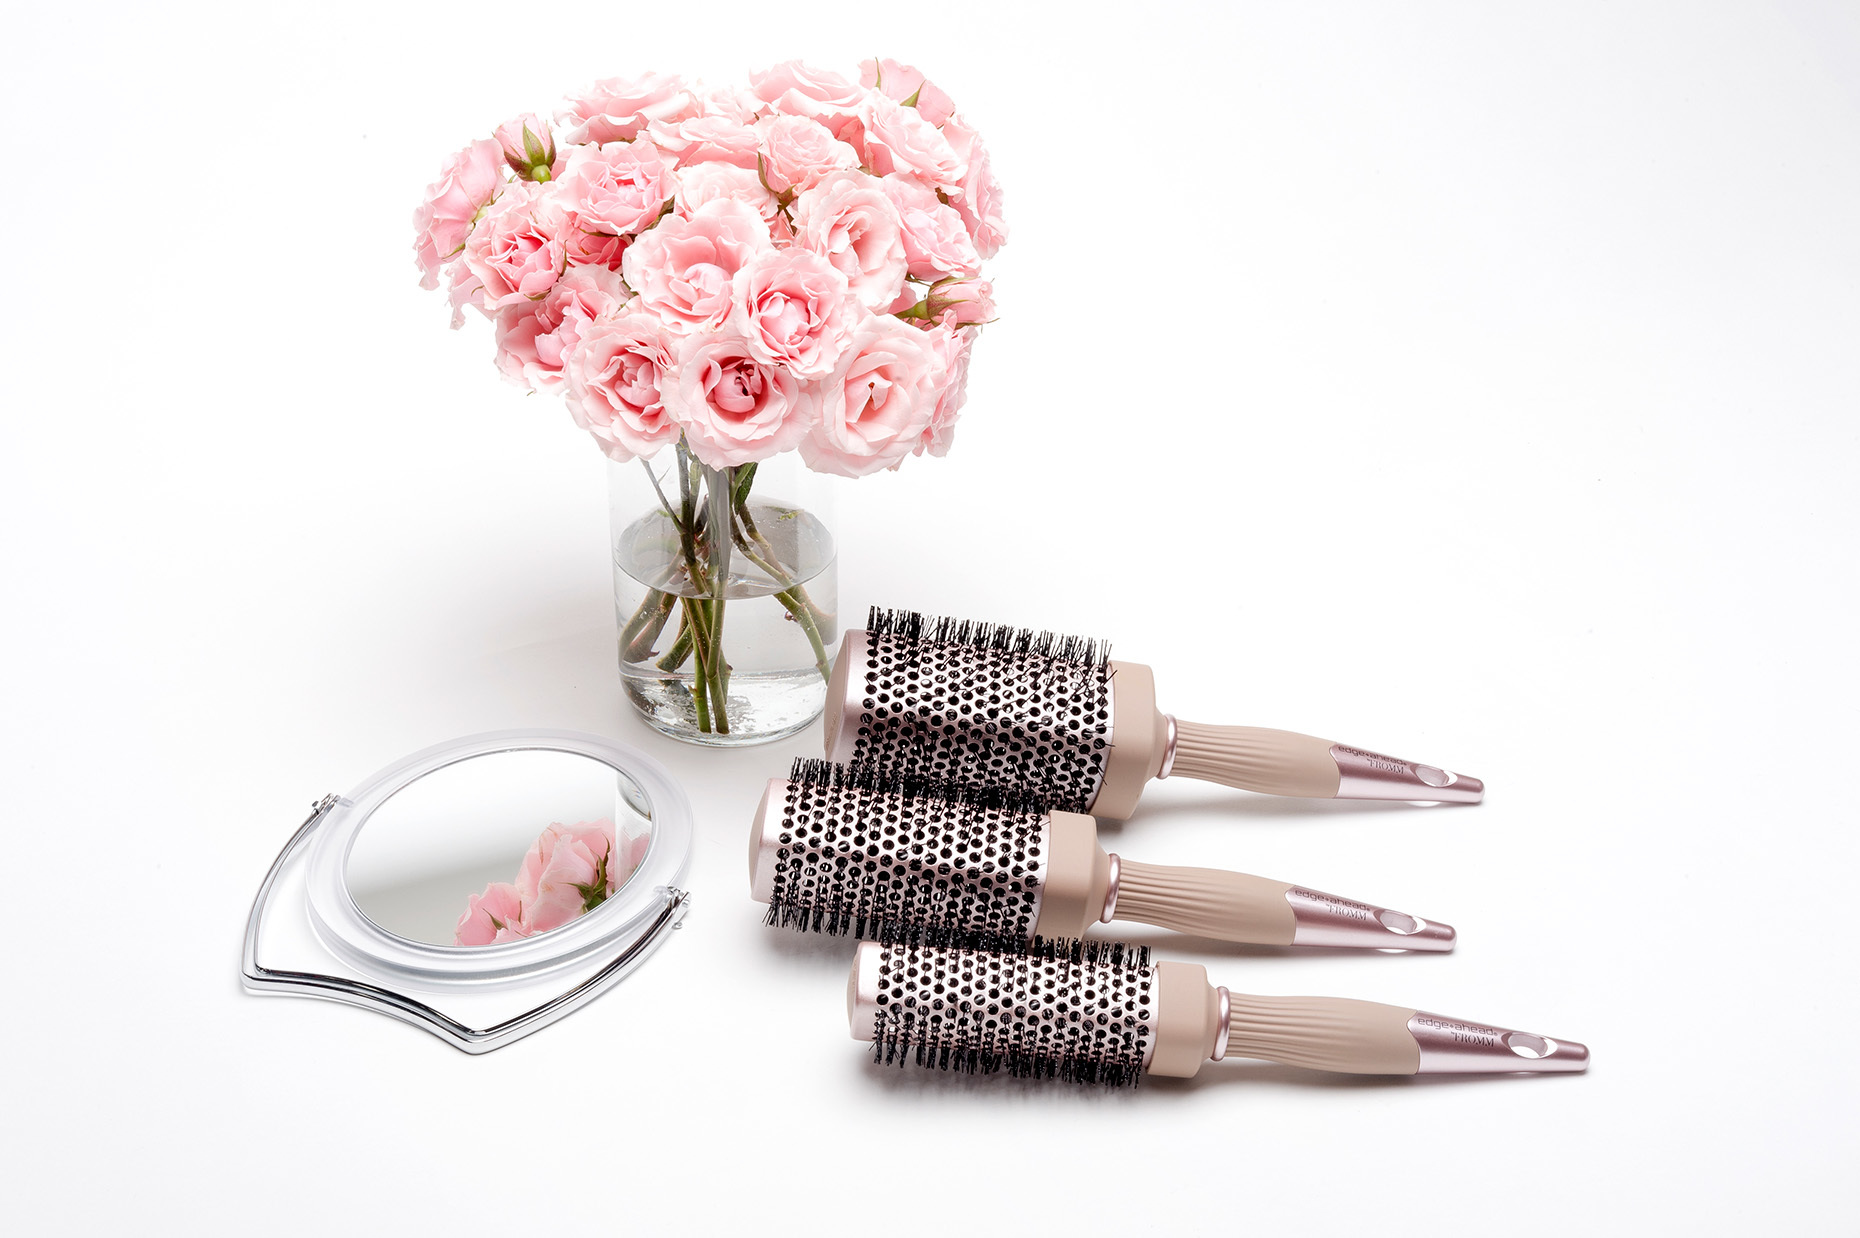 FROMM_1907_Beauty-Products_Brush-set-Rose-Gold_RHanelPhotography